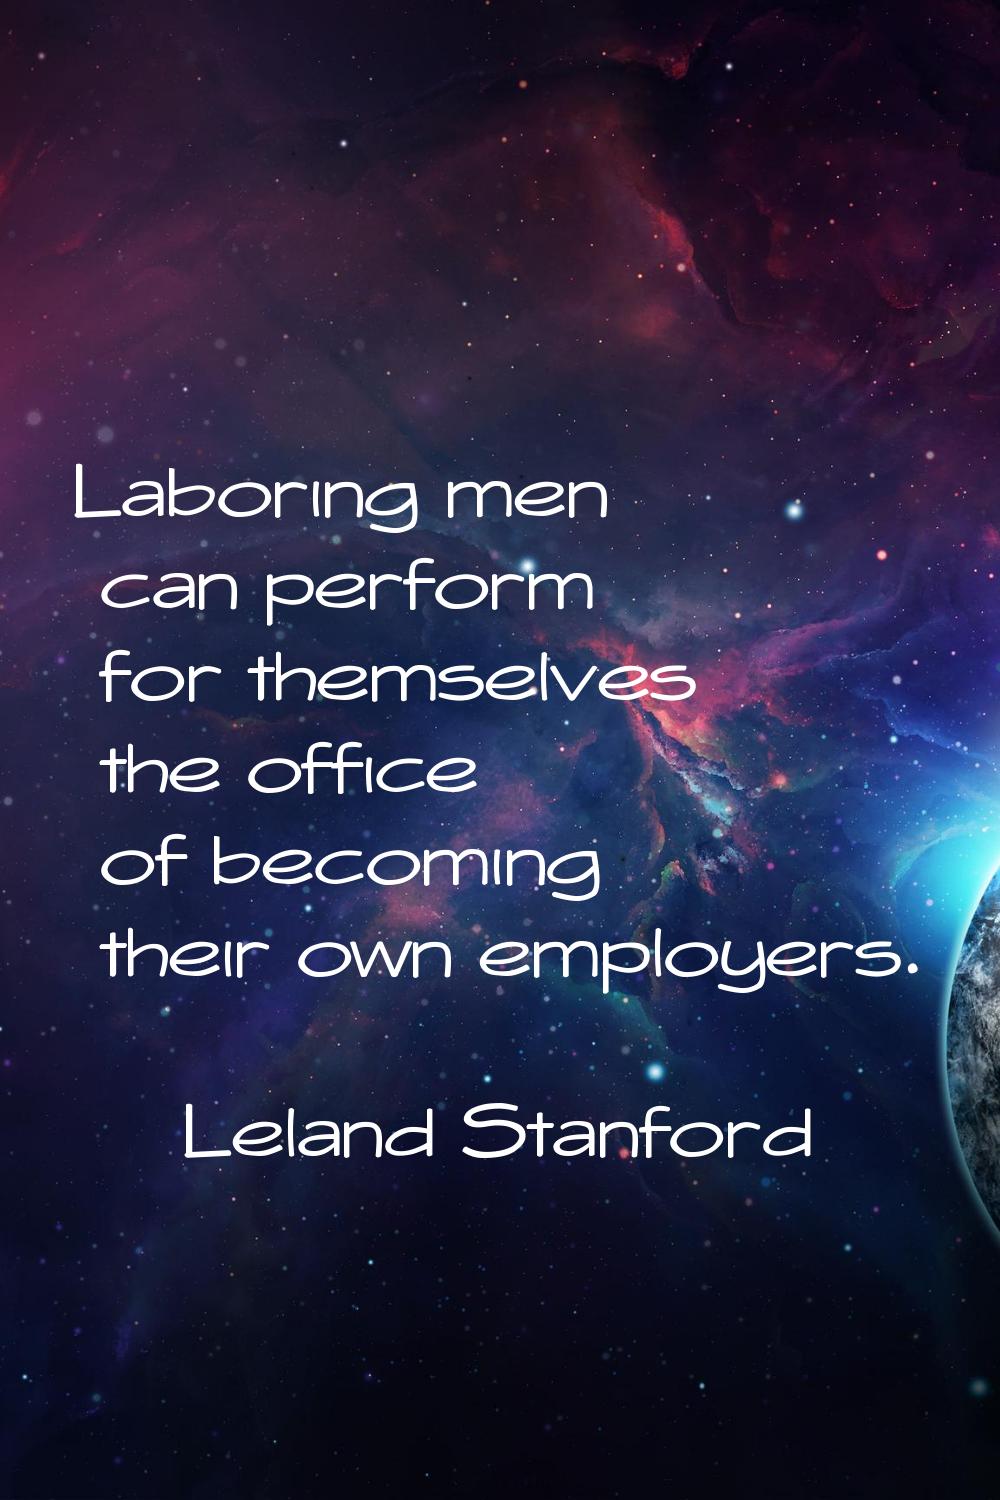 Laboring men can perform for themselves the office of becoming their own employers.